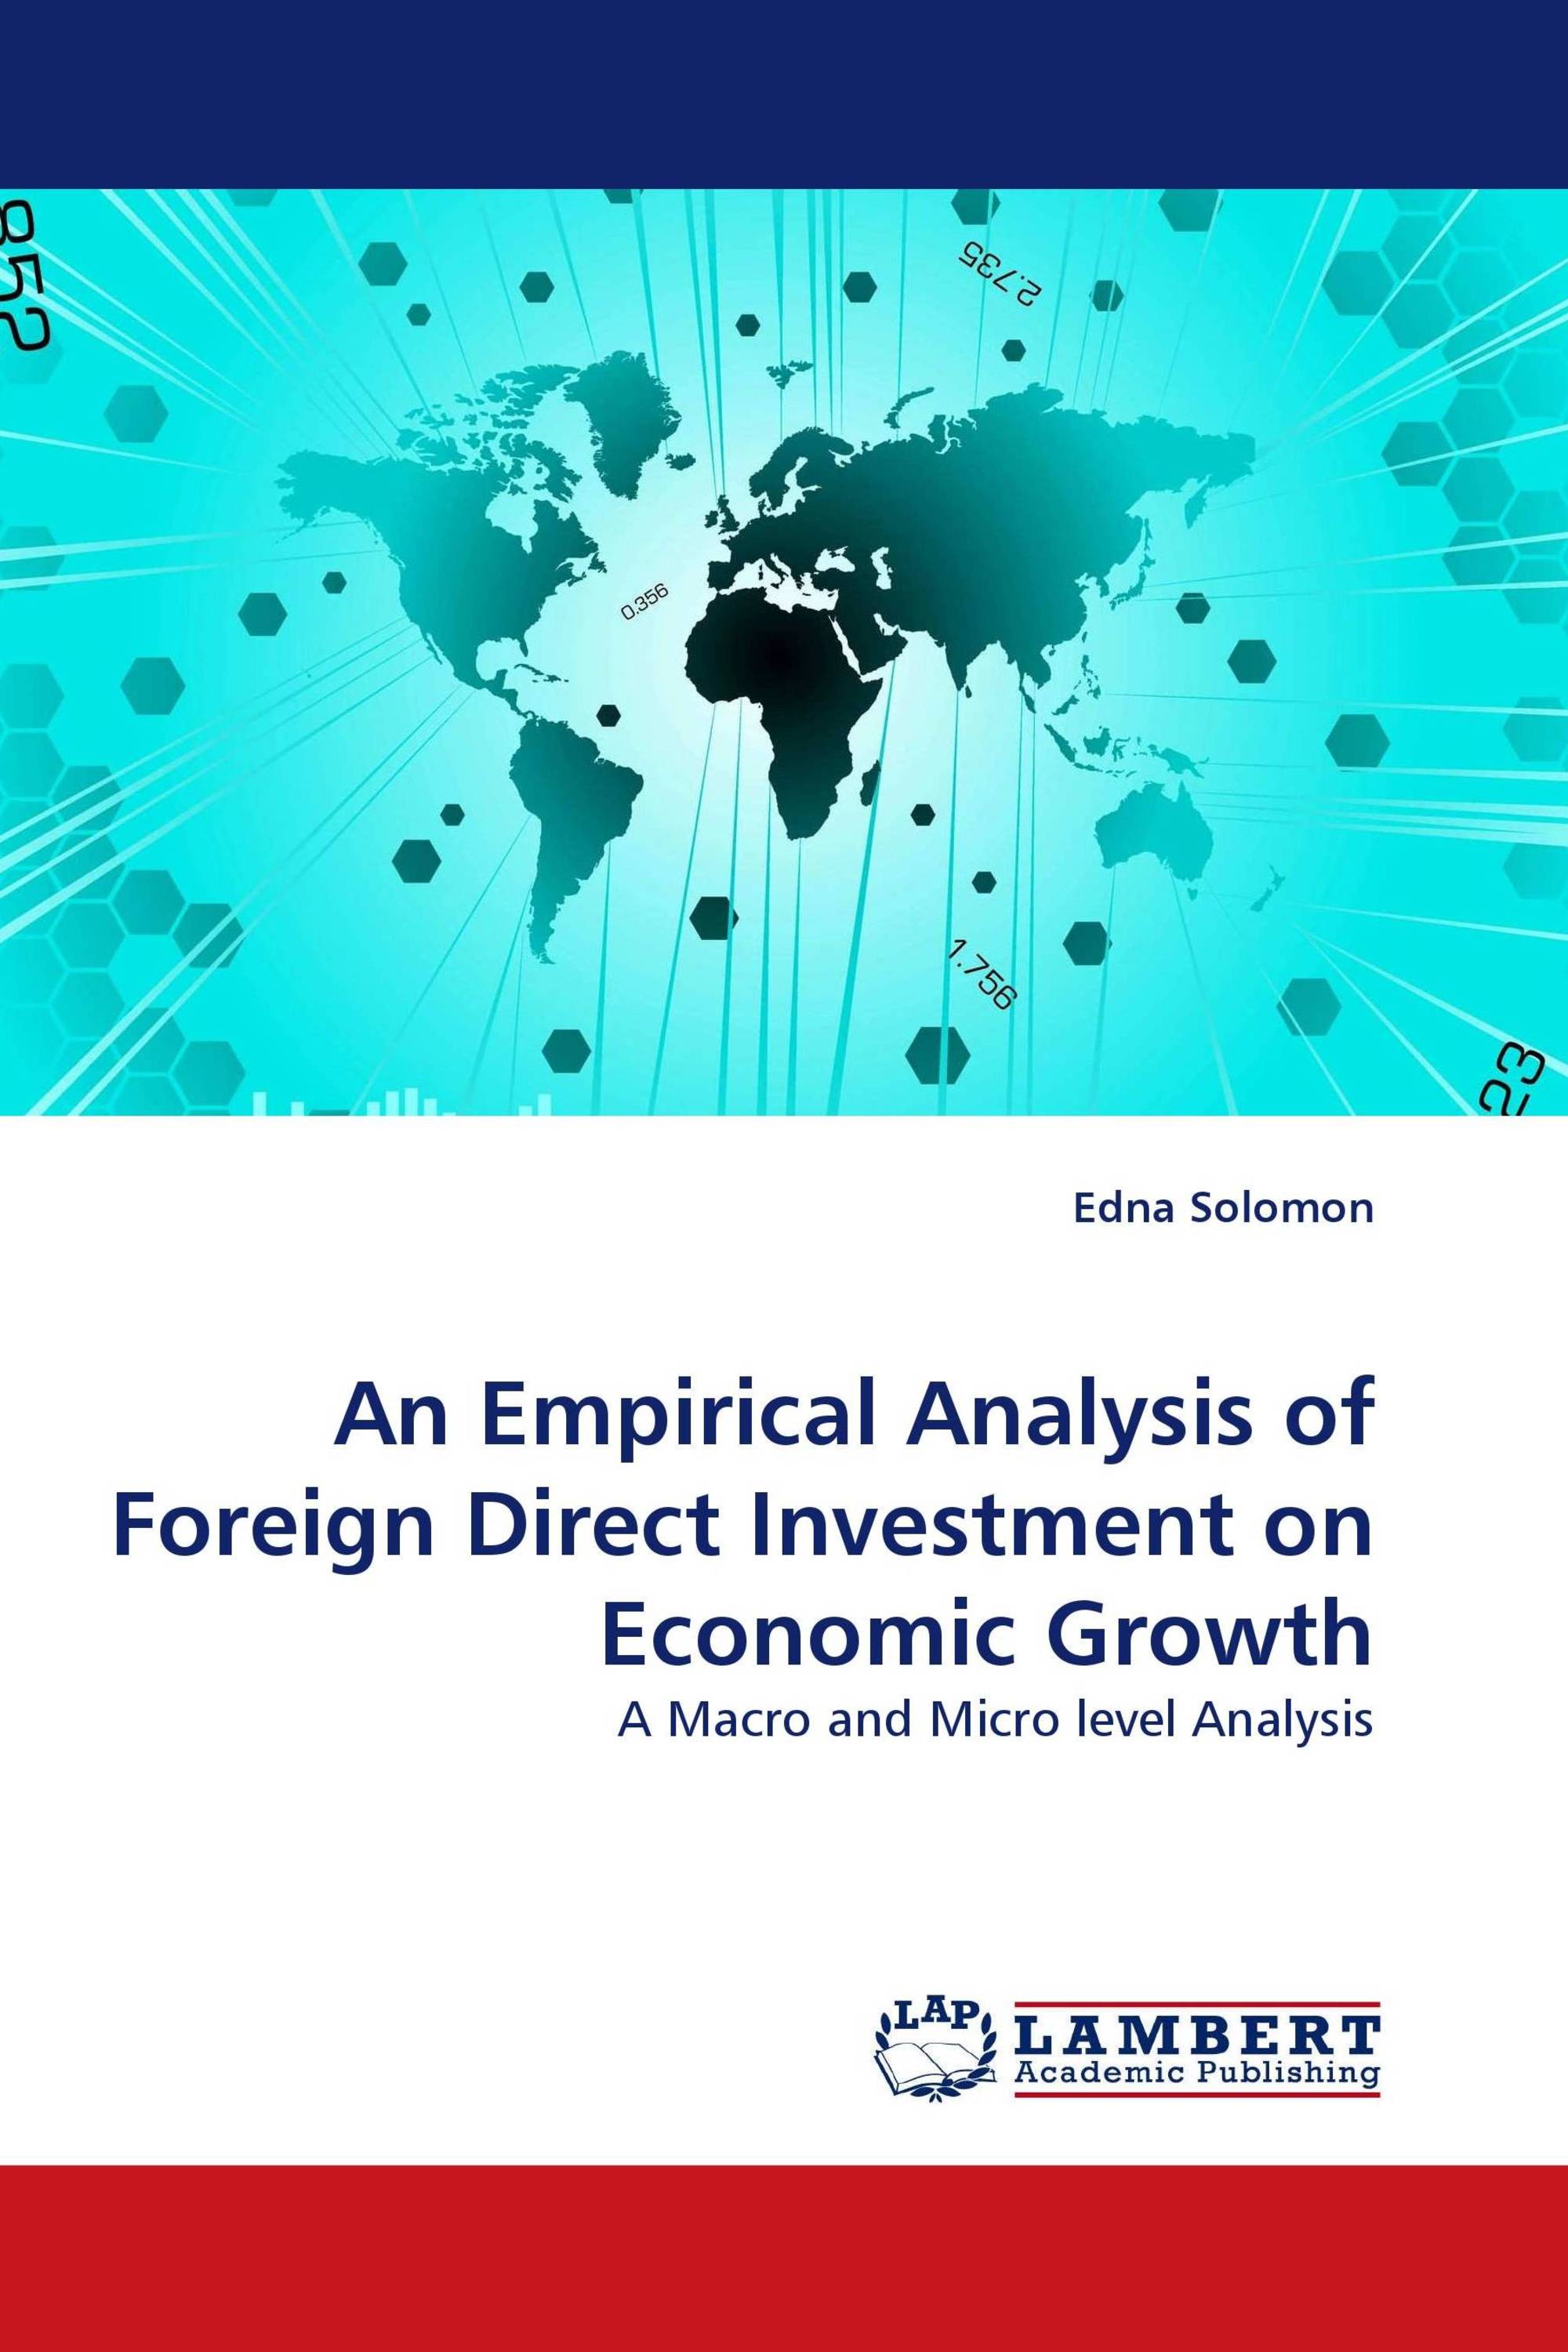 An Empirical Analysis of Foreign Direct Investment on Economic Growth